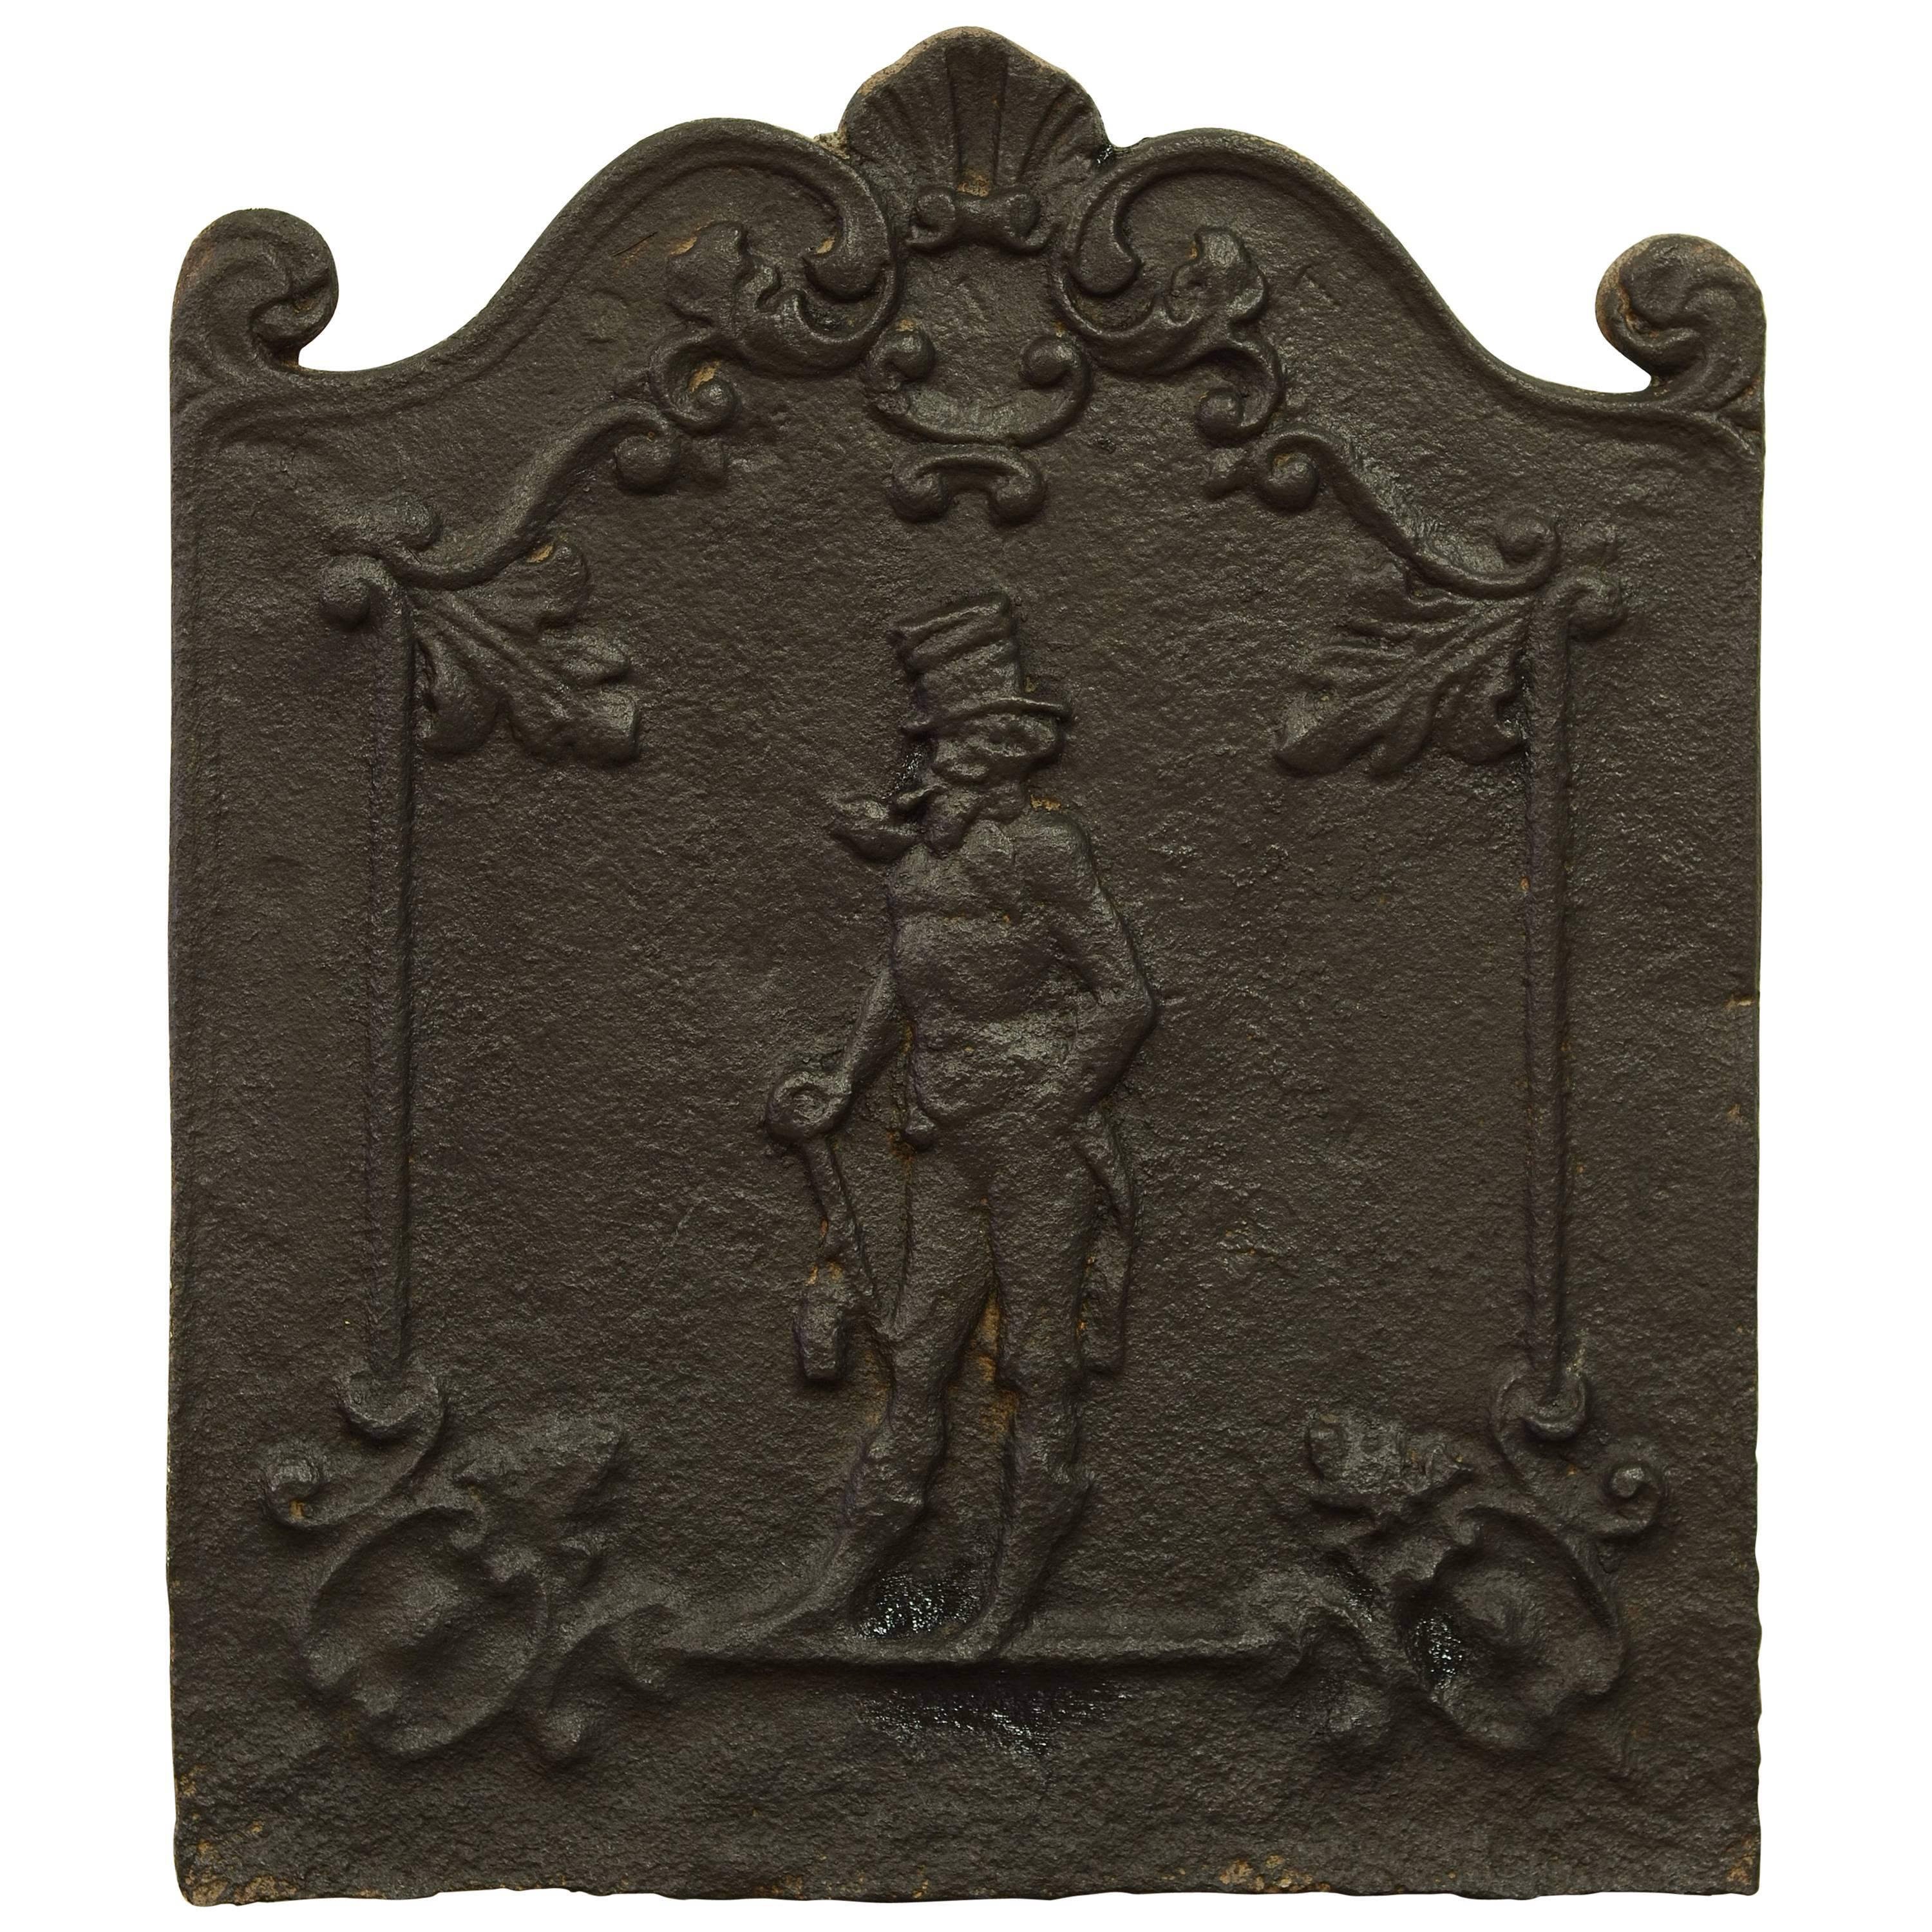 Antique Decorative Fireback Displaying a Man with a "Top Hat"